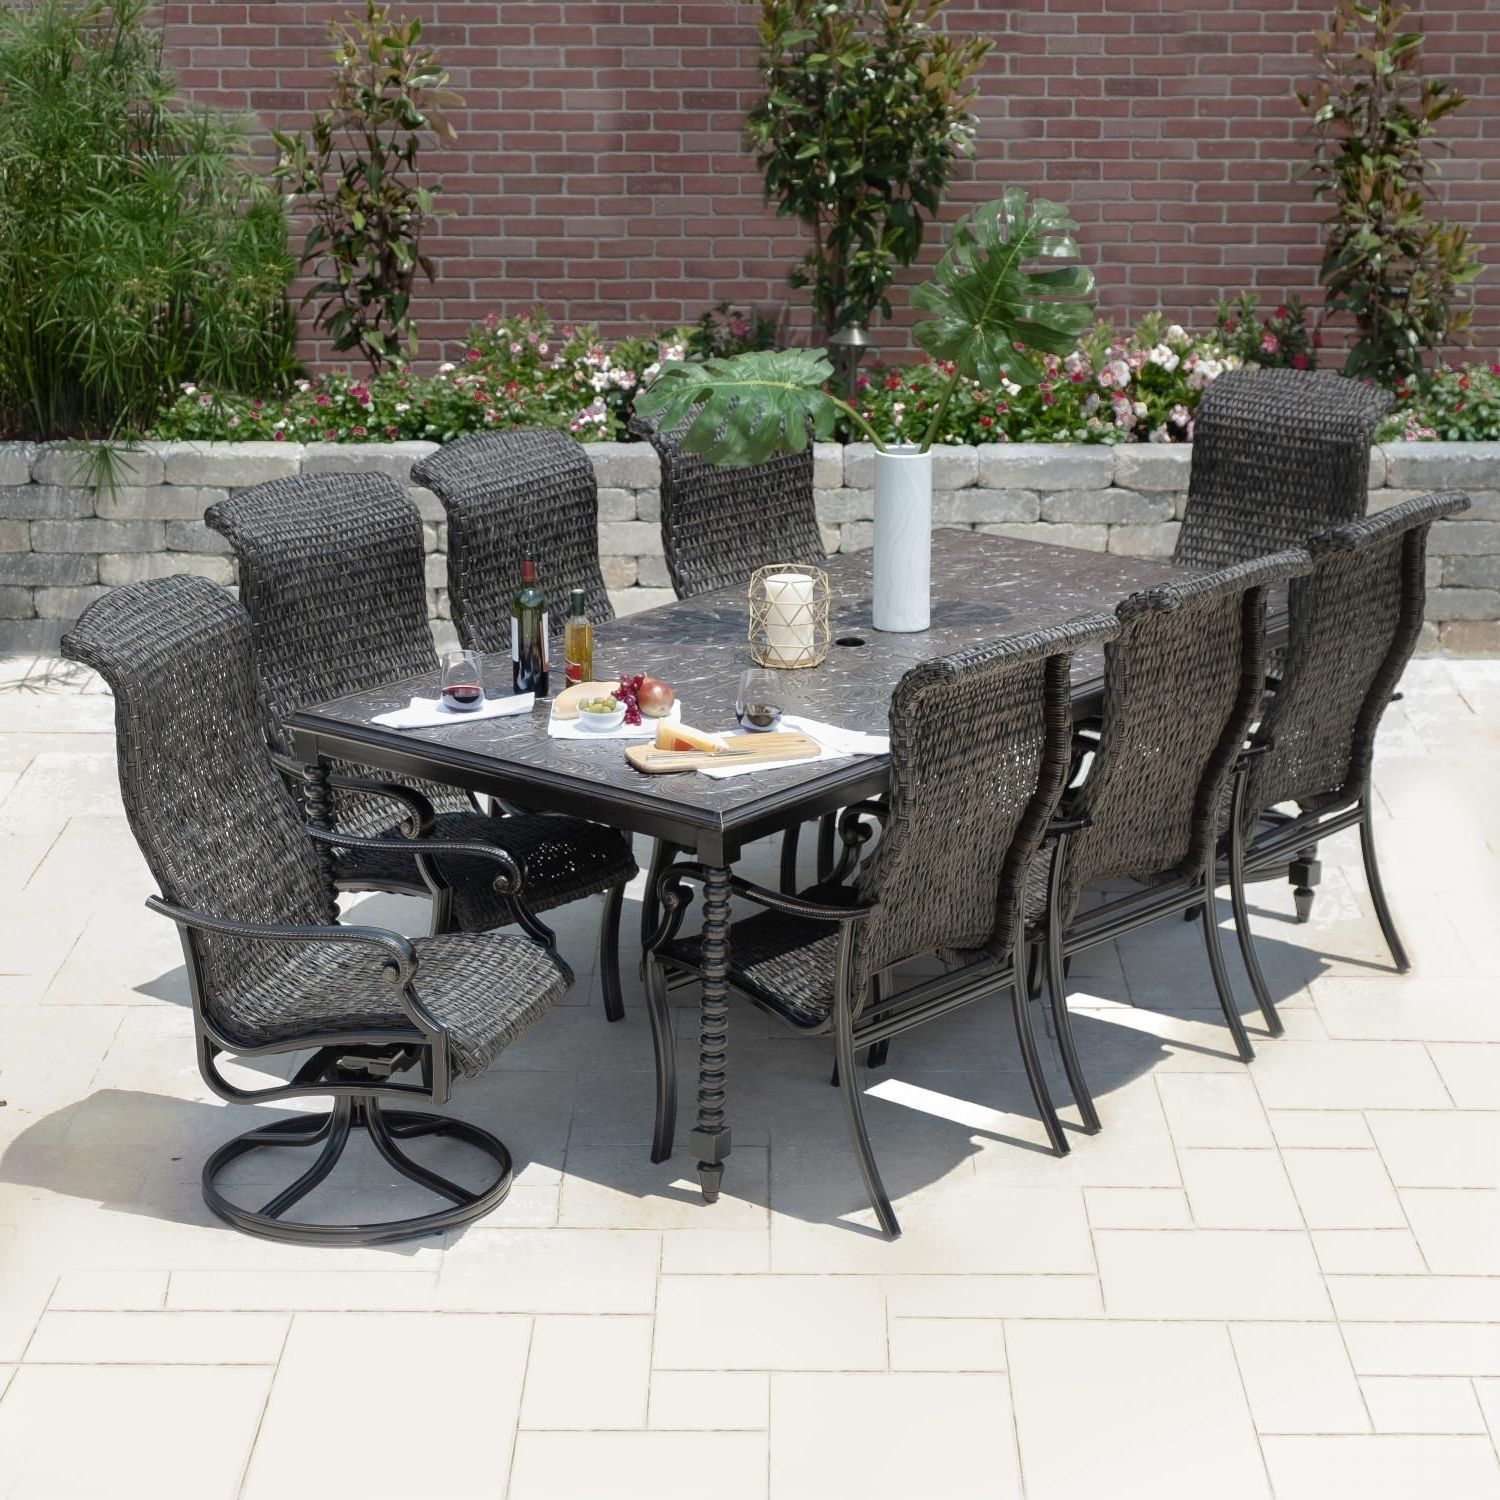 9 Piece Rectangular Patio Dining Sets Throughout Trendy Du Monde 9 Piece Banana Leaf Wicker Patio Dining Set W/ 90 X 46 Inch (View 8 of 15)